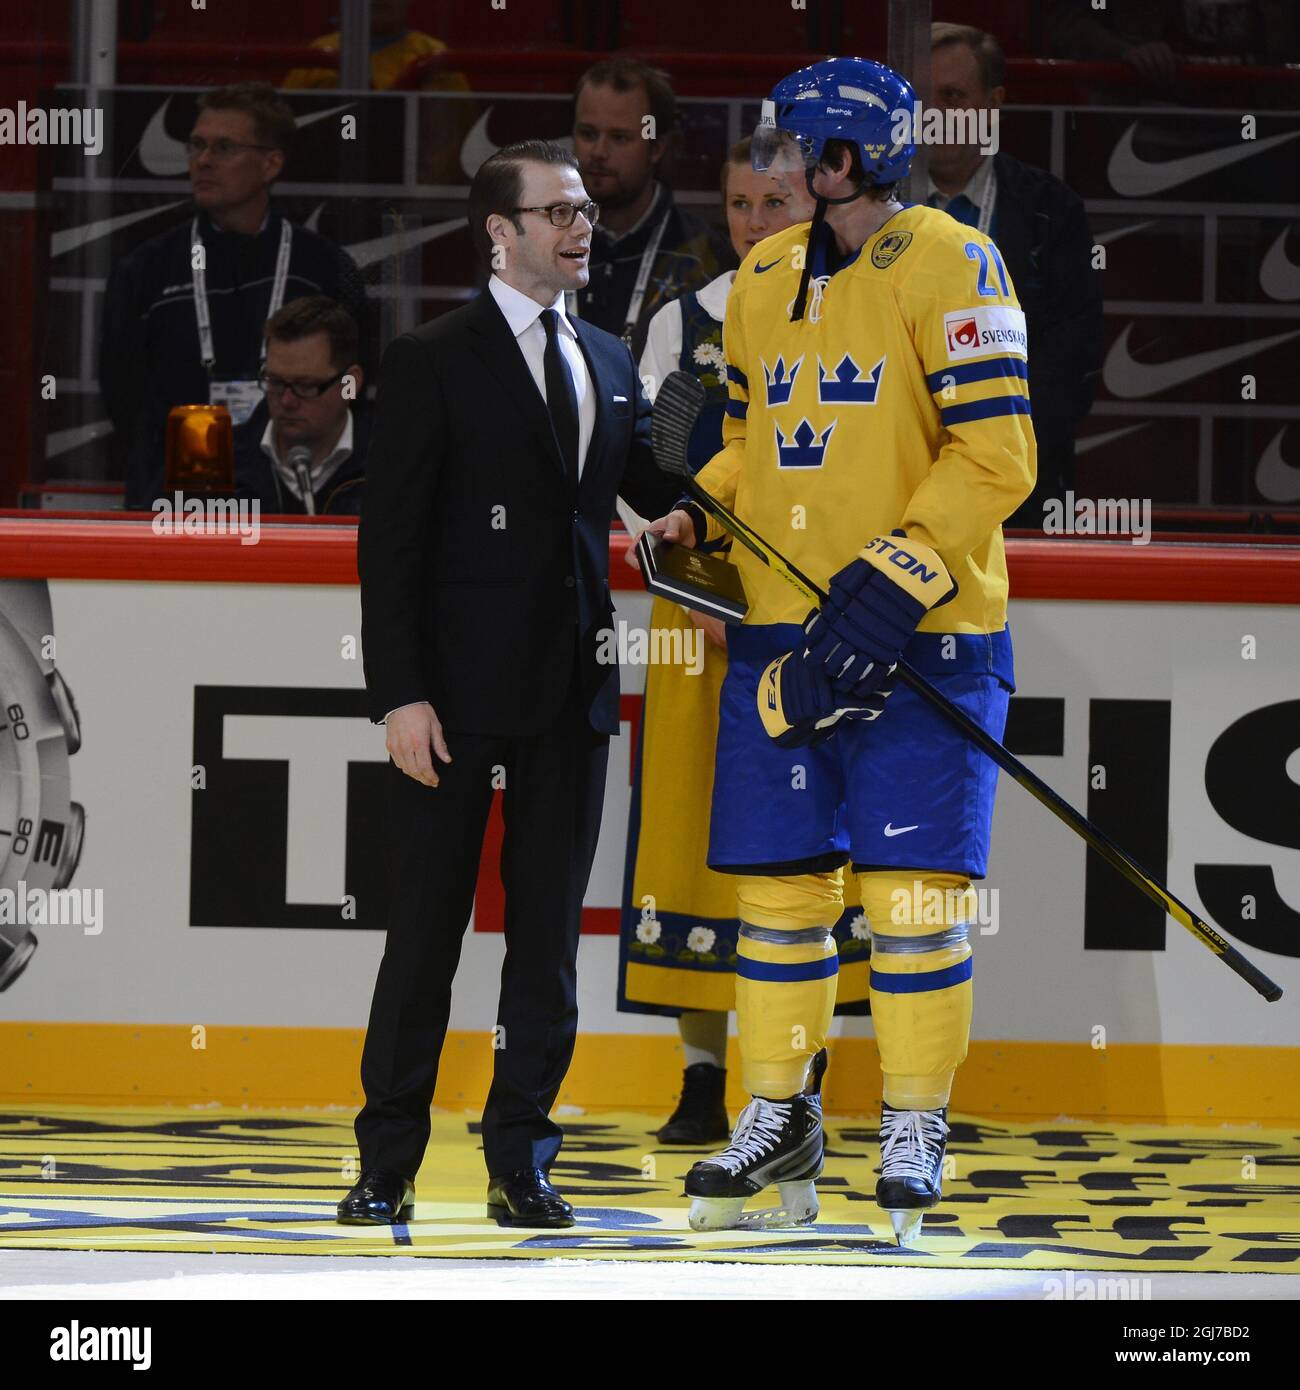 STOCKHOLM 2012-05-07 Swedish player Loui Eriksson receives the price Swedish best player of the match from Sweden's Price Daniel after the ice hockey game between Denmark and Sweden during the 2012 IIHF men's ice hockey World Championship in Stockholm May 7, 2012. Foto Claudio Bresciani  / SCANPIX / kod 10090 Stock Photo